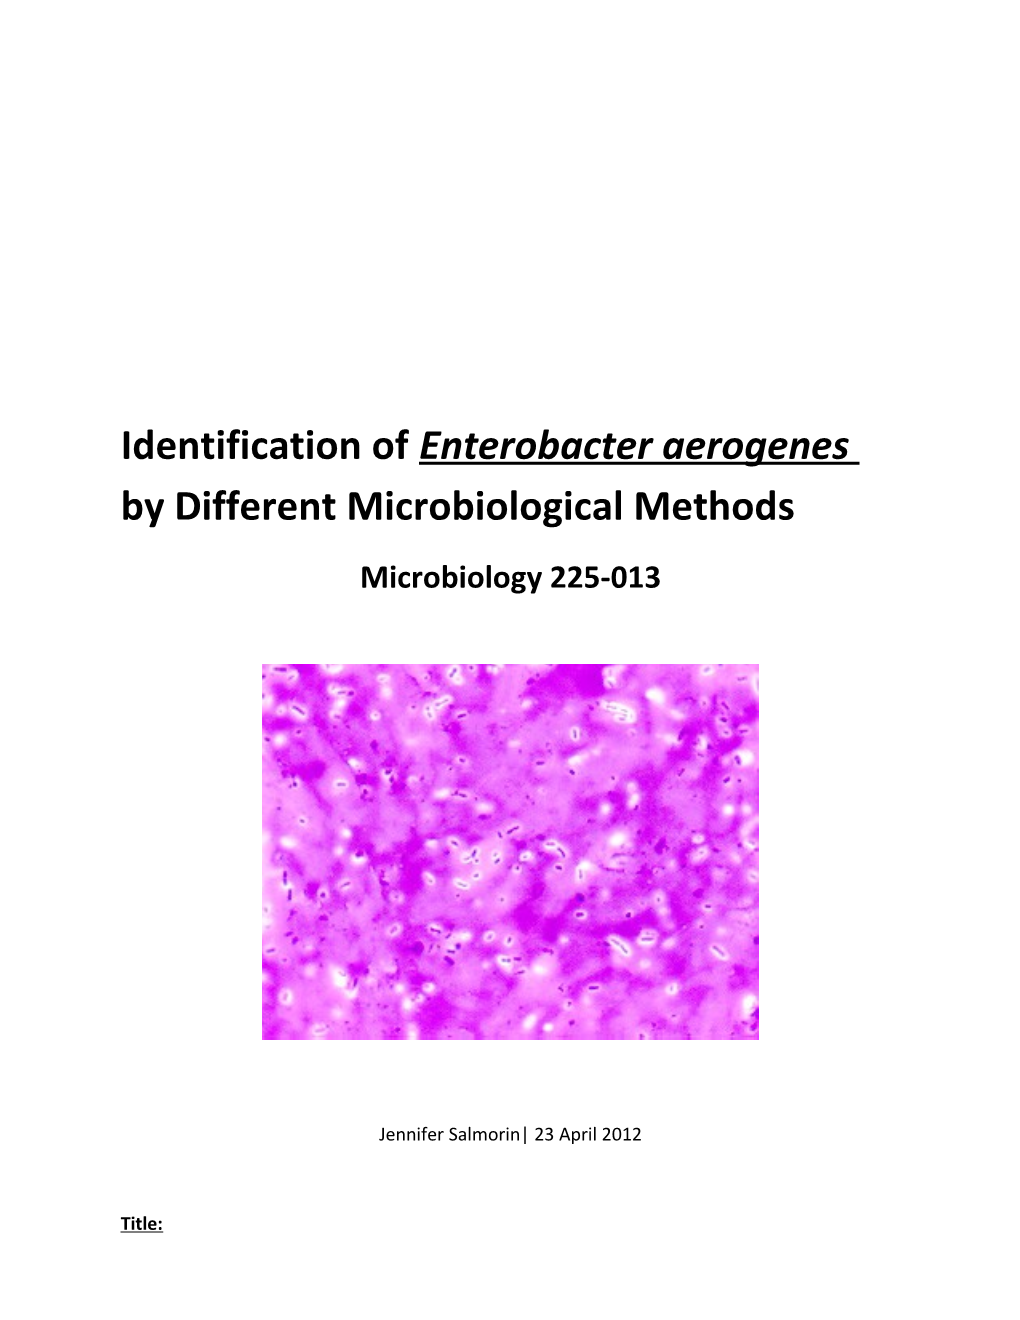 Identification of Enterobacter Aerogenes by Different Microbiological Methods